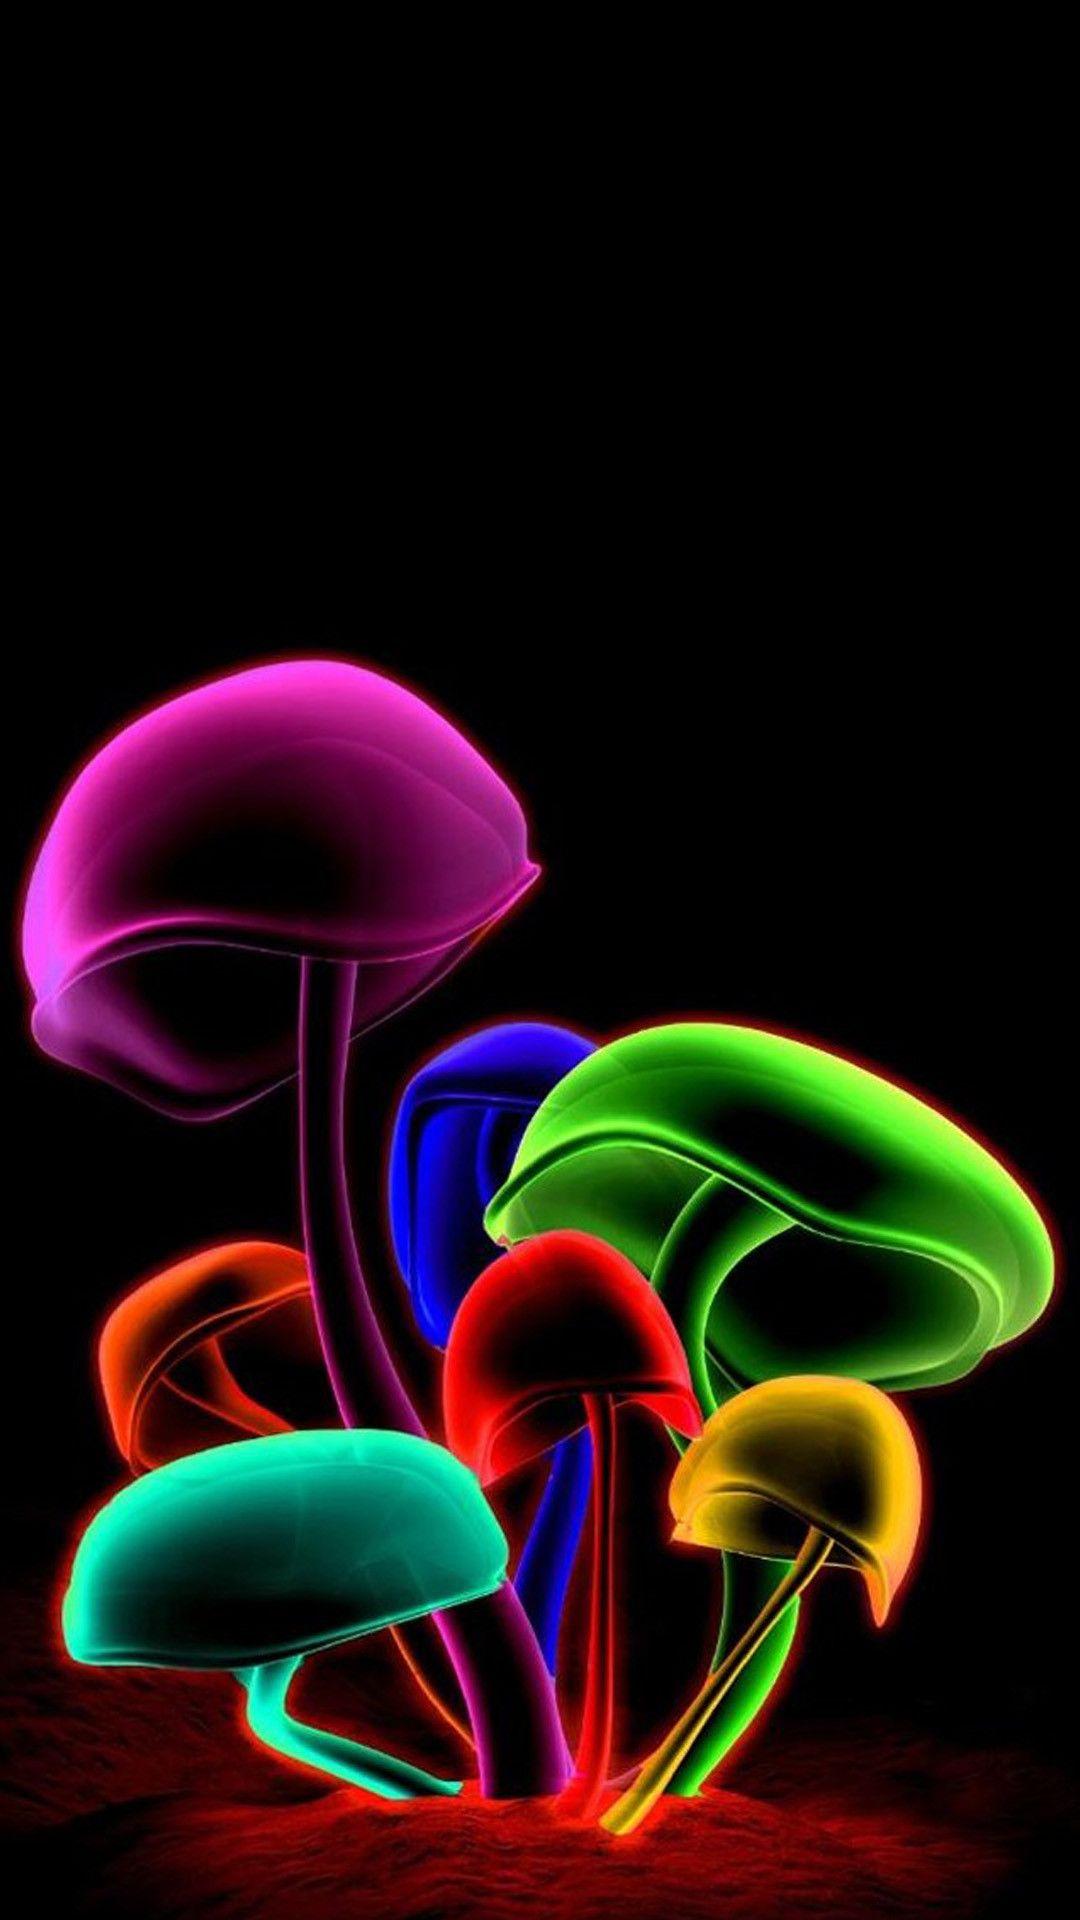 3d Wallpaper For Android Apk Image Num 7